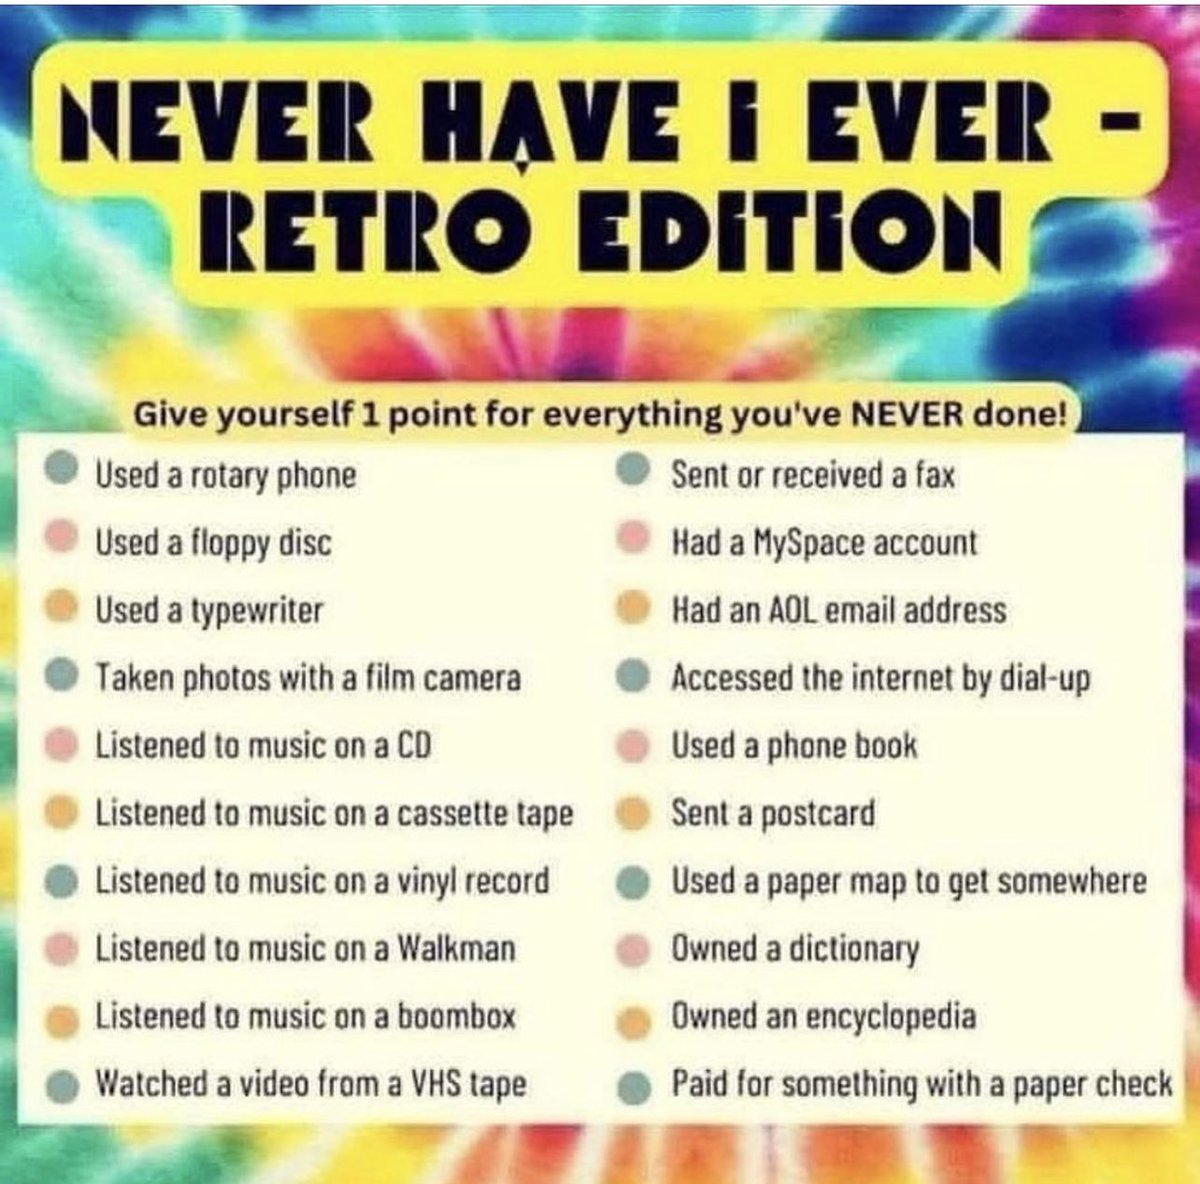 I scored a fantastic 1 point and I've never felt older than I do right now

What's your score?
#NeverHaveIEver #retro #90skids